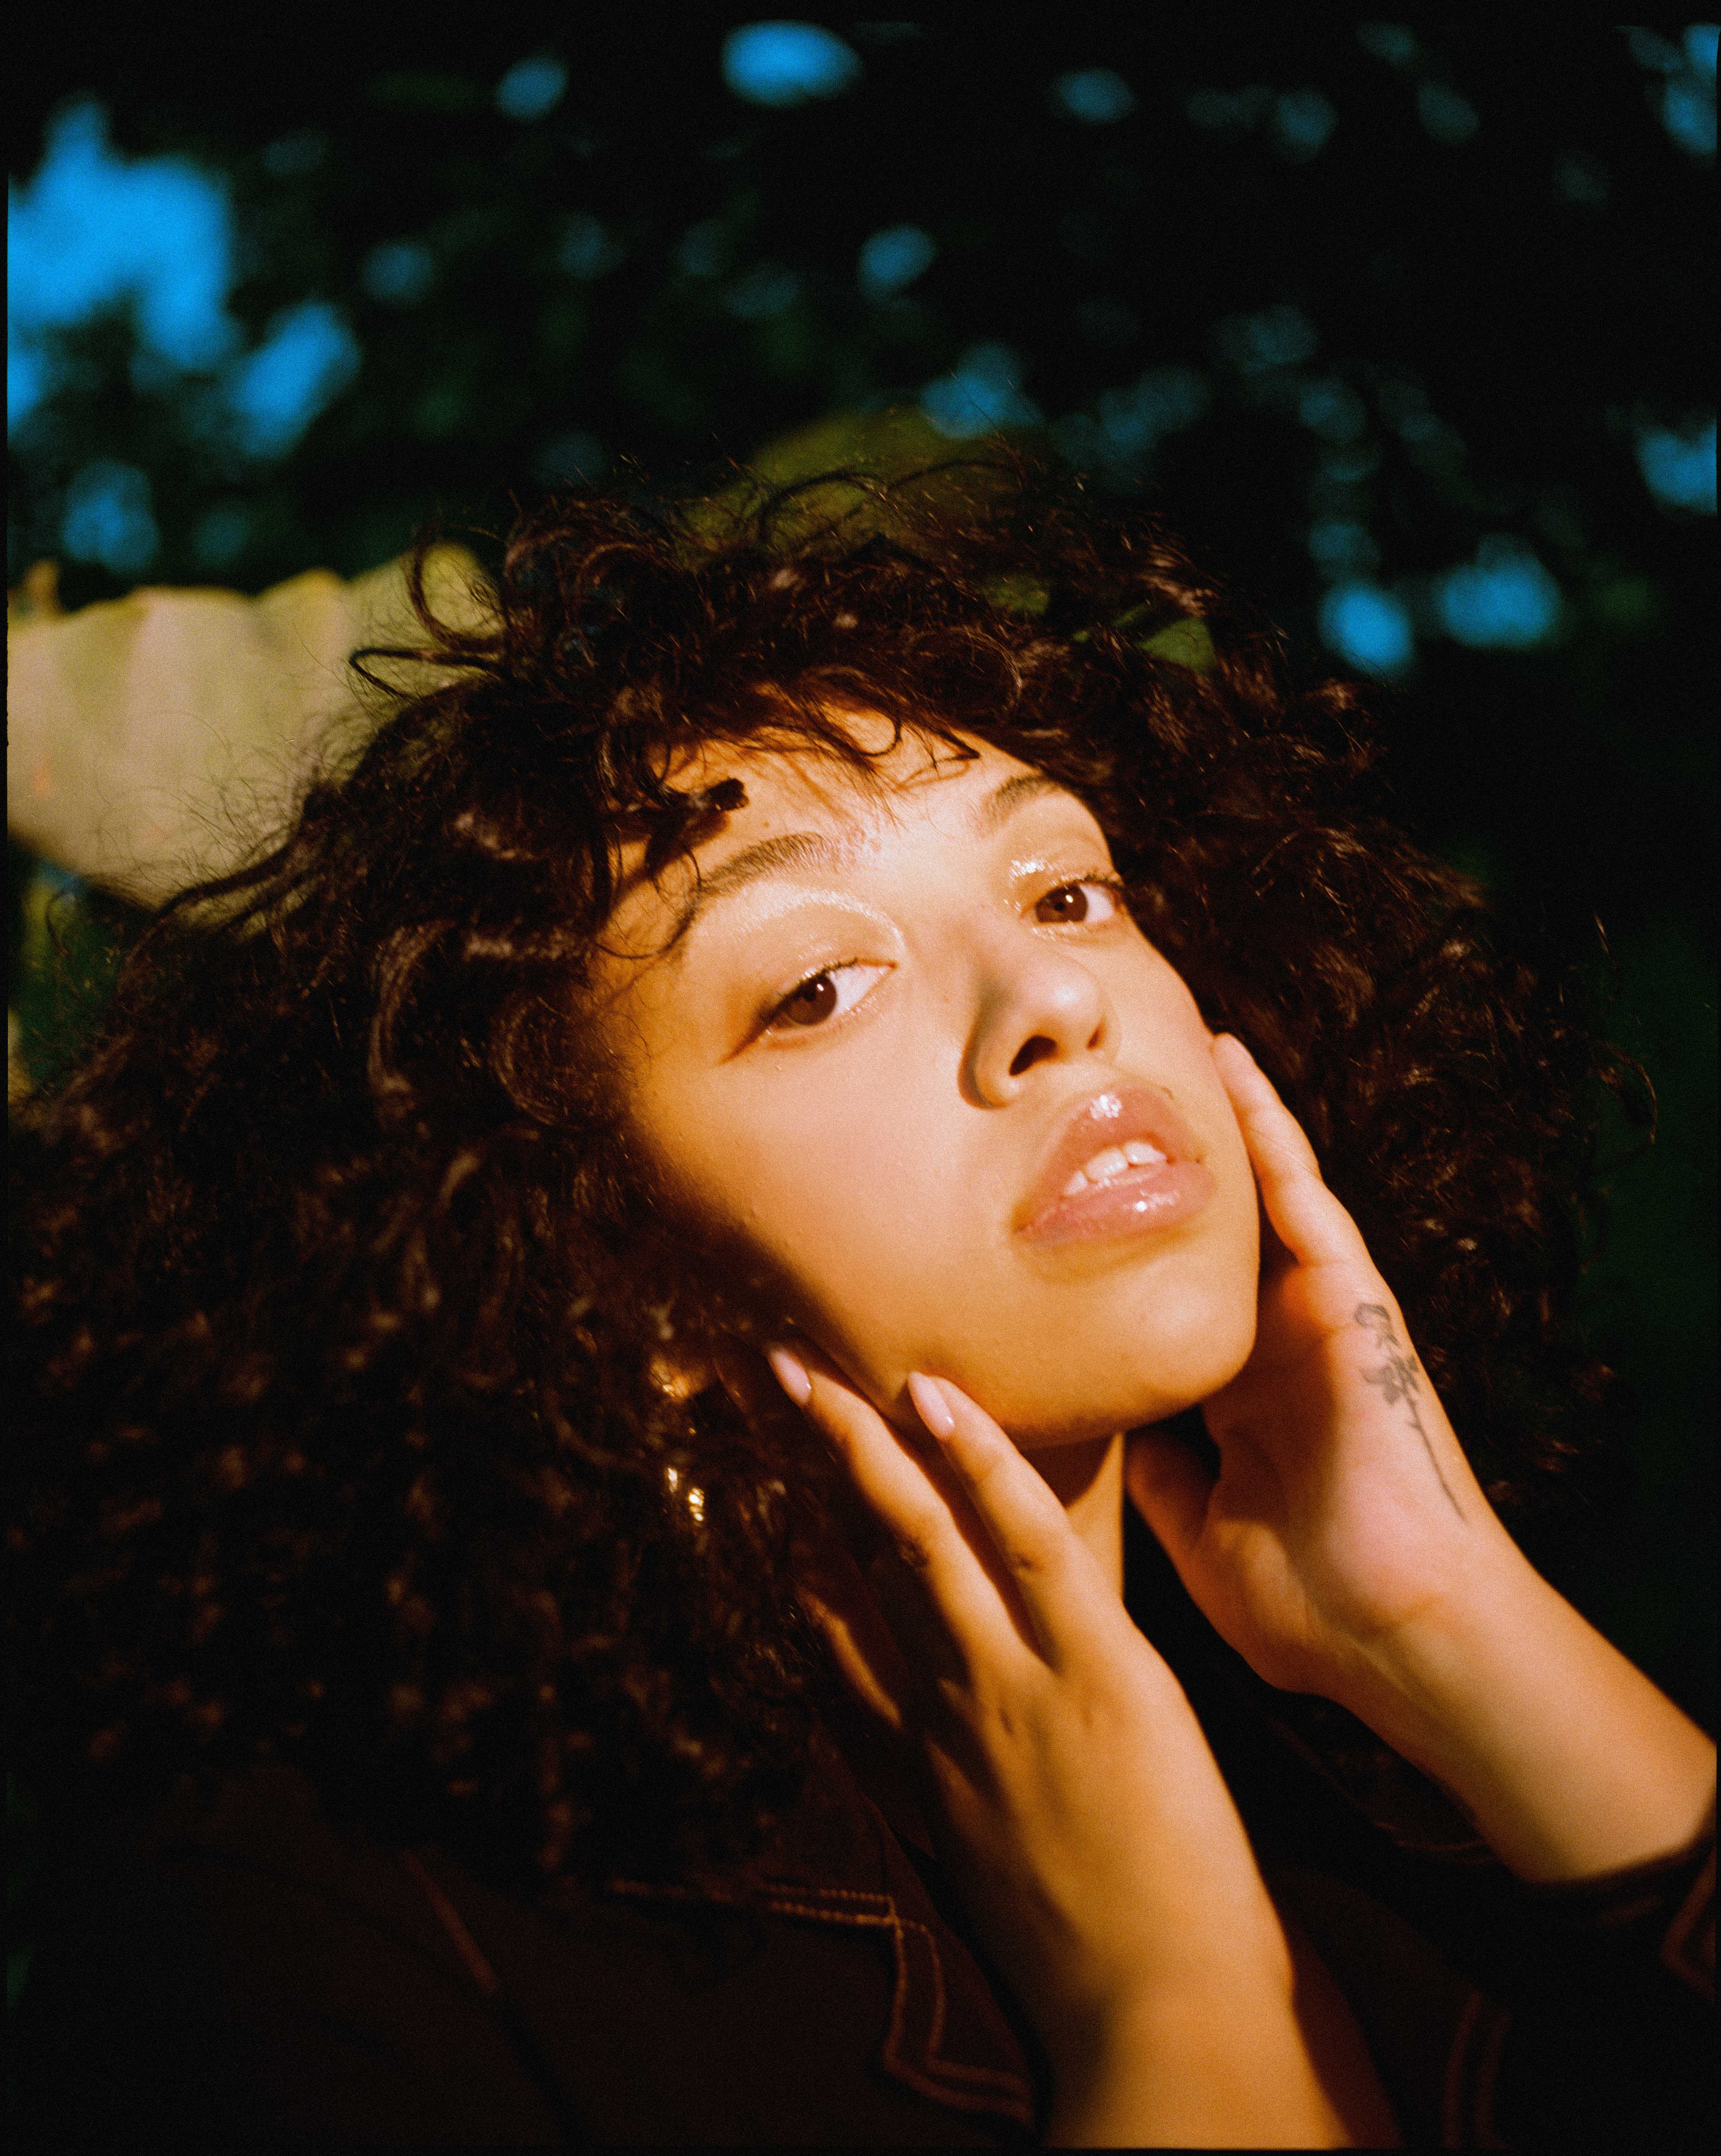 MAHALIA INTERVIEW FEATURE R&B MUSIC NEWS ADULTHOOD SINGER SONGWRITER UK USA BREXIT SPOTIFY